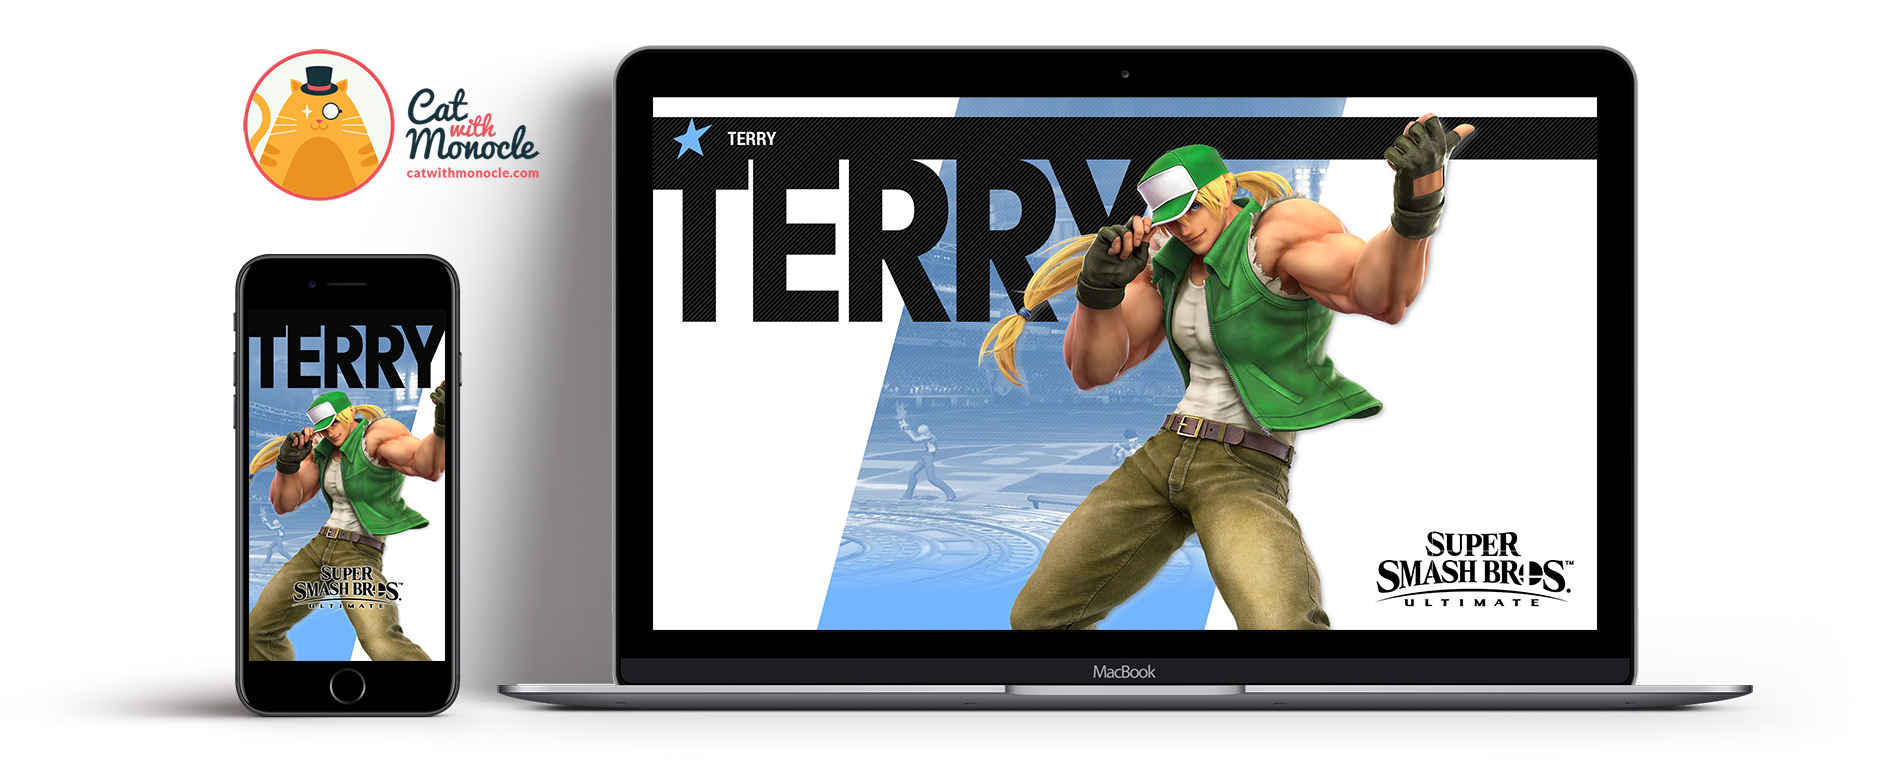 Super Smash Bros Ultimate Terry Wallpapers Costume 4